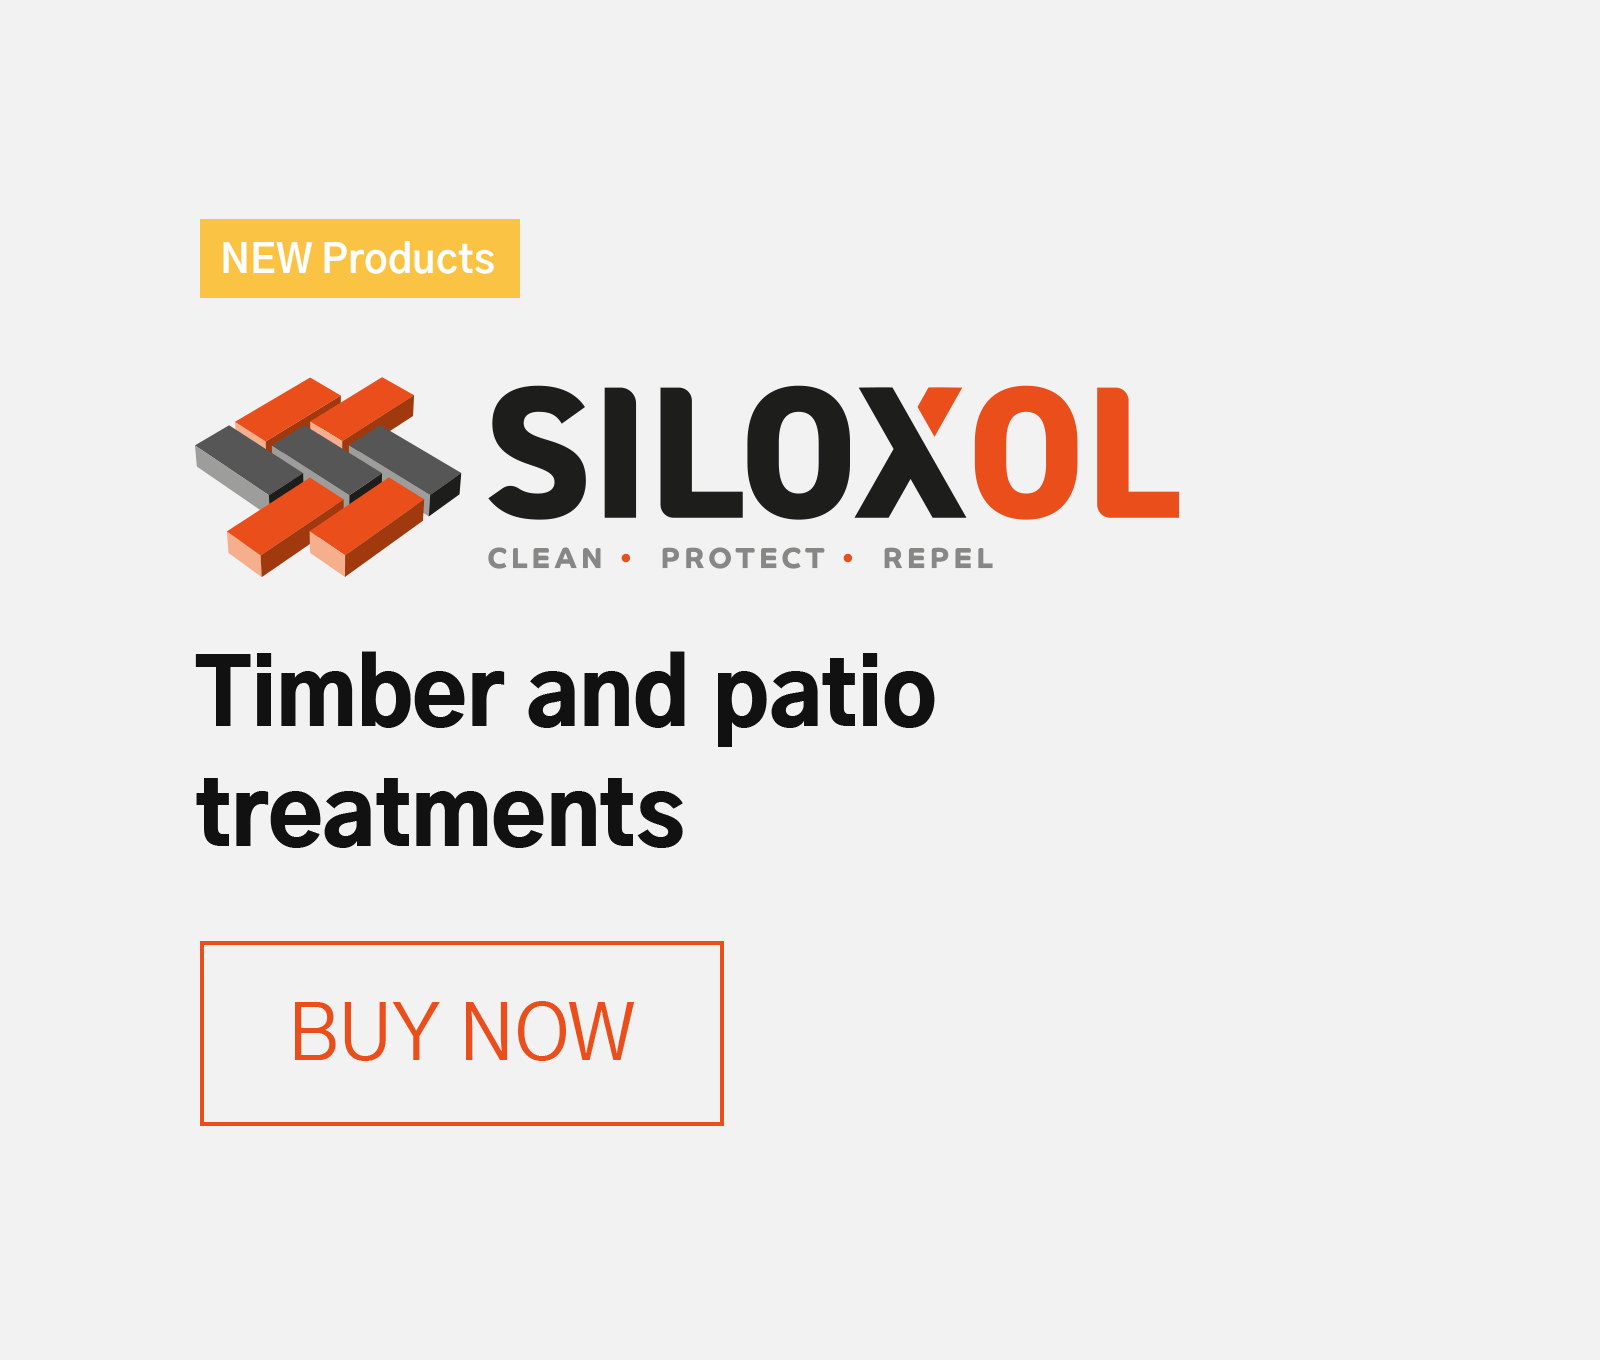 NEW Products - Our Siloxol Range